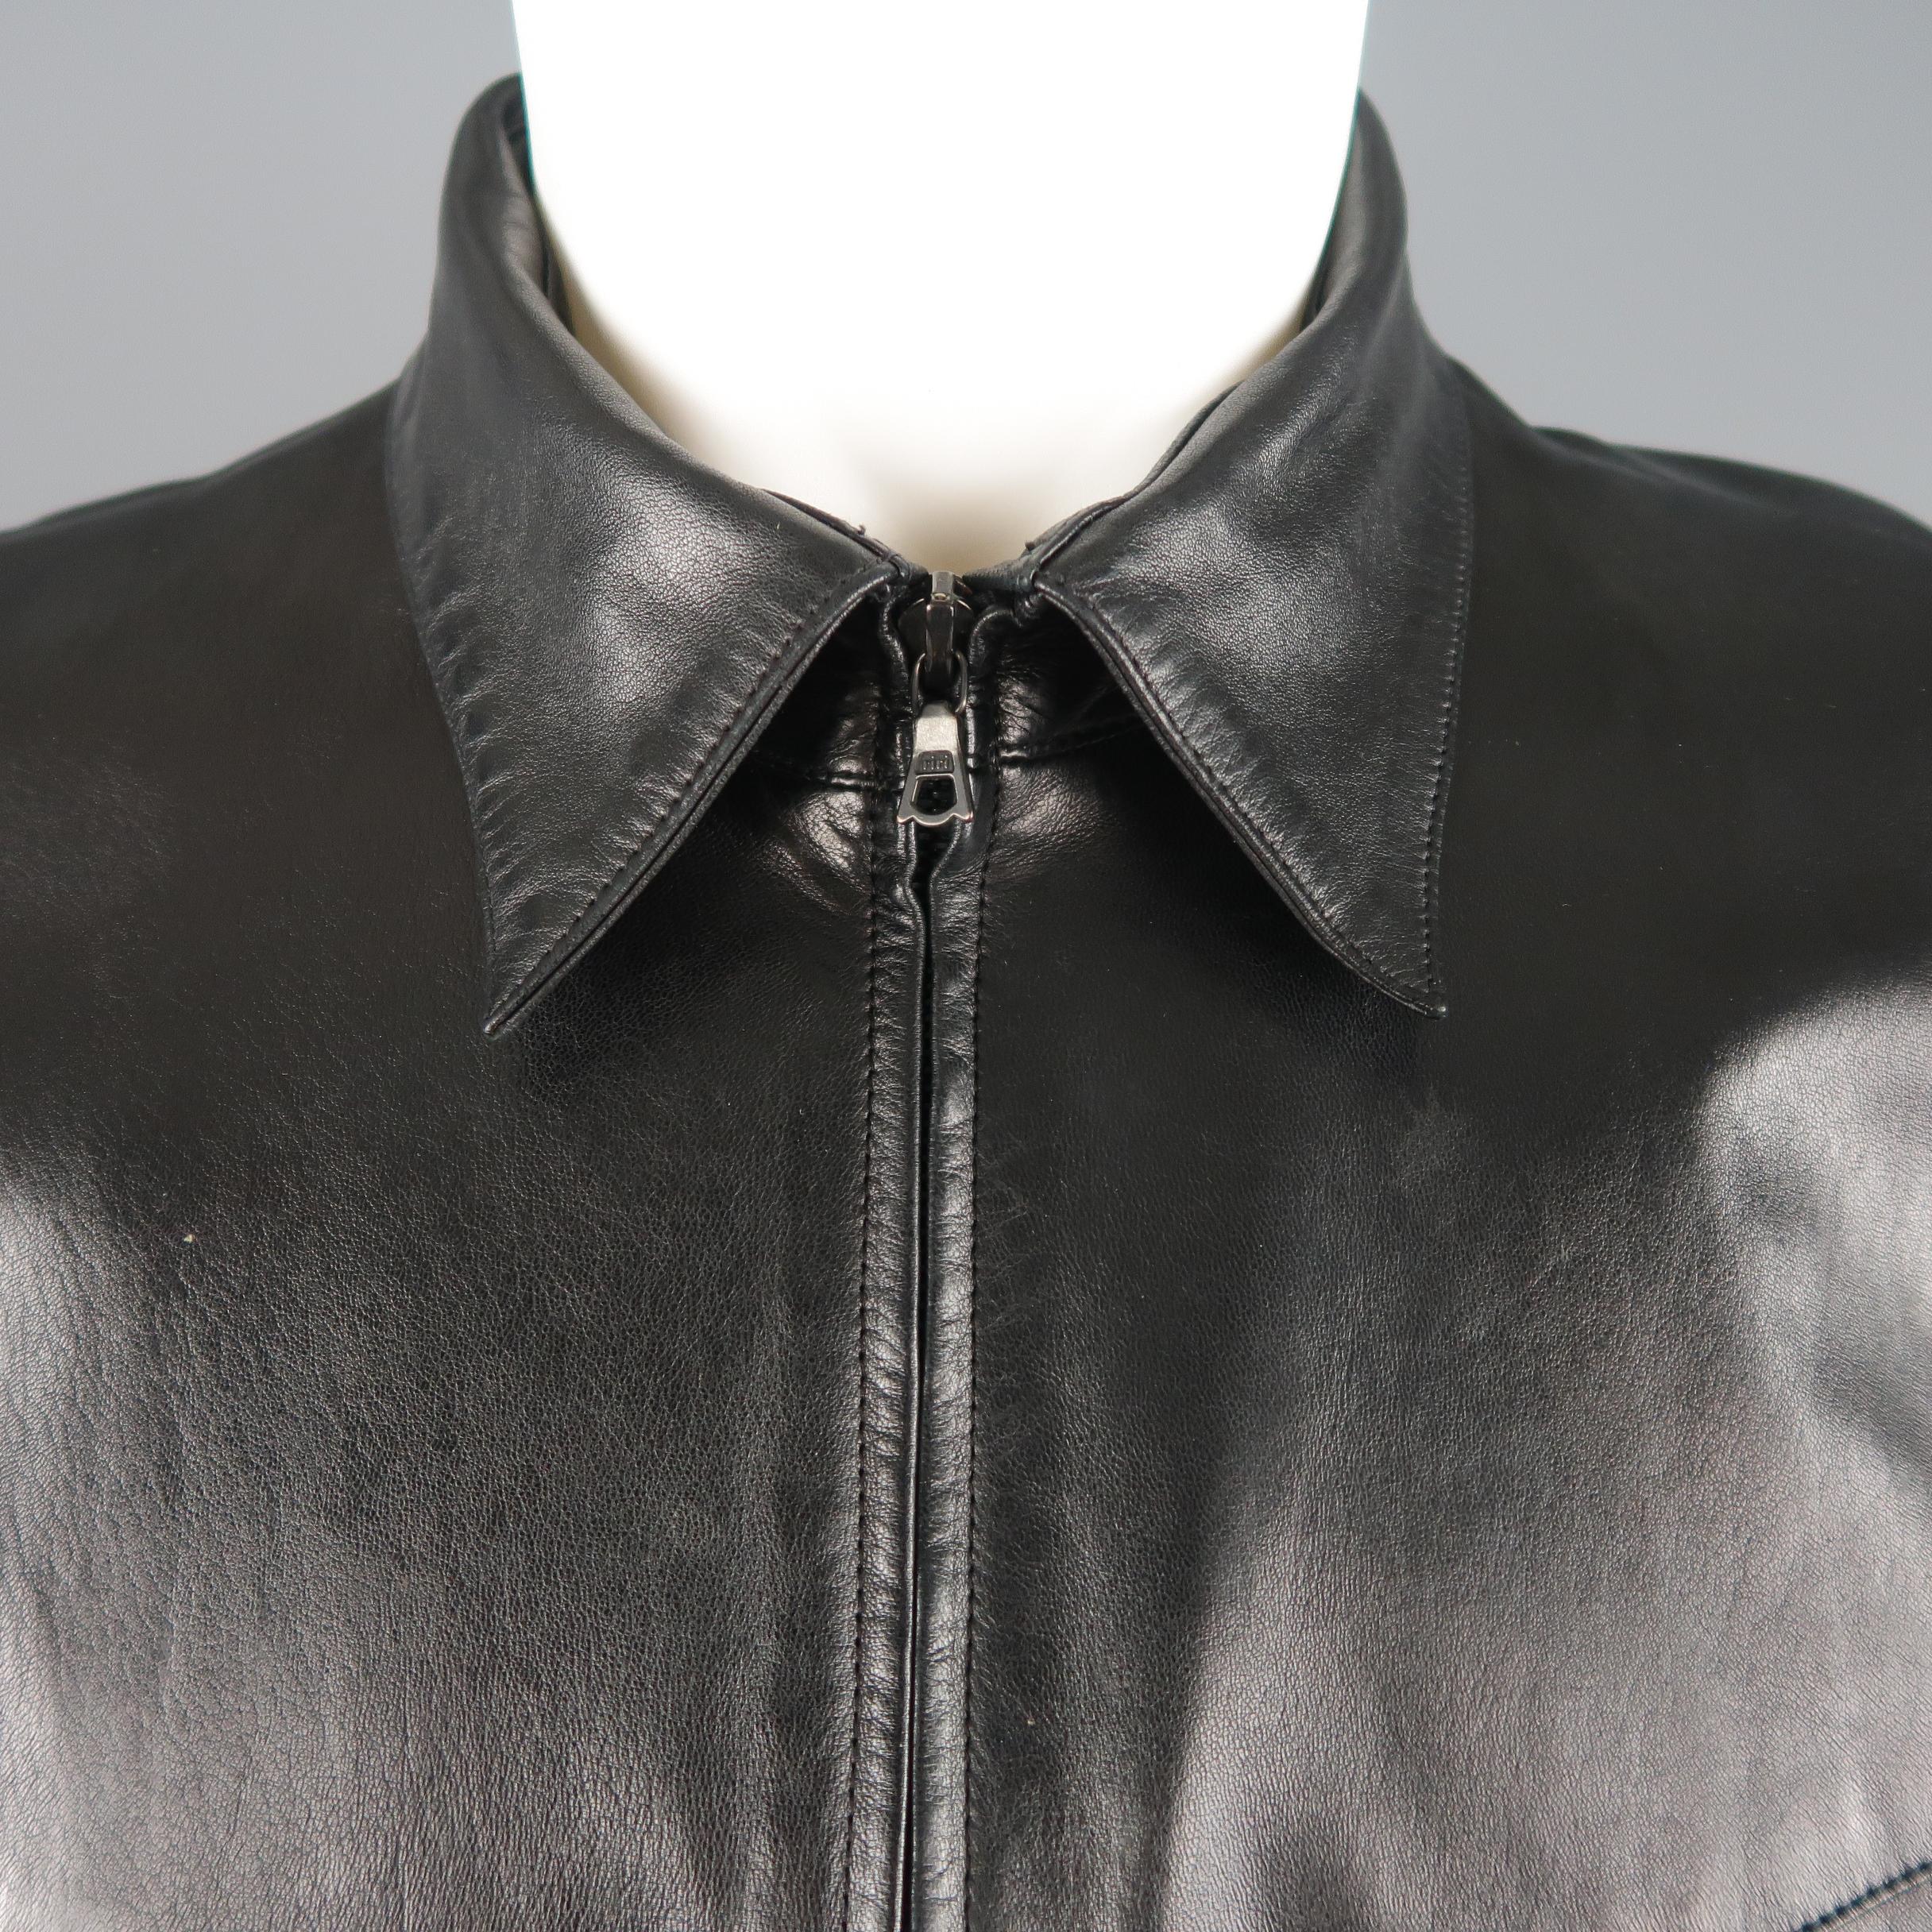 Rare & Vintage CLAUDE MONTANA jacket comes in black leather with a pointed collar, zip up front, slanted pockets, and silver tone studded pattern shoulders. Minor wear. Label faded. 

Made in France. 
Good Vintage Condition.
Marked: IT 50
